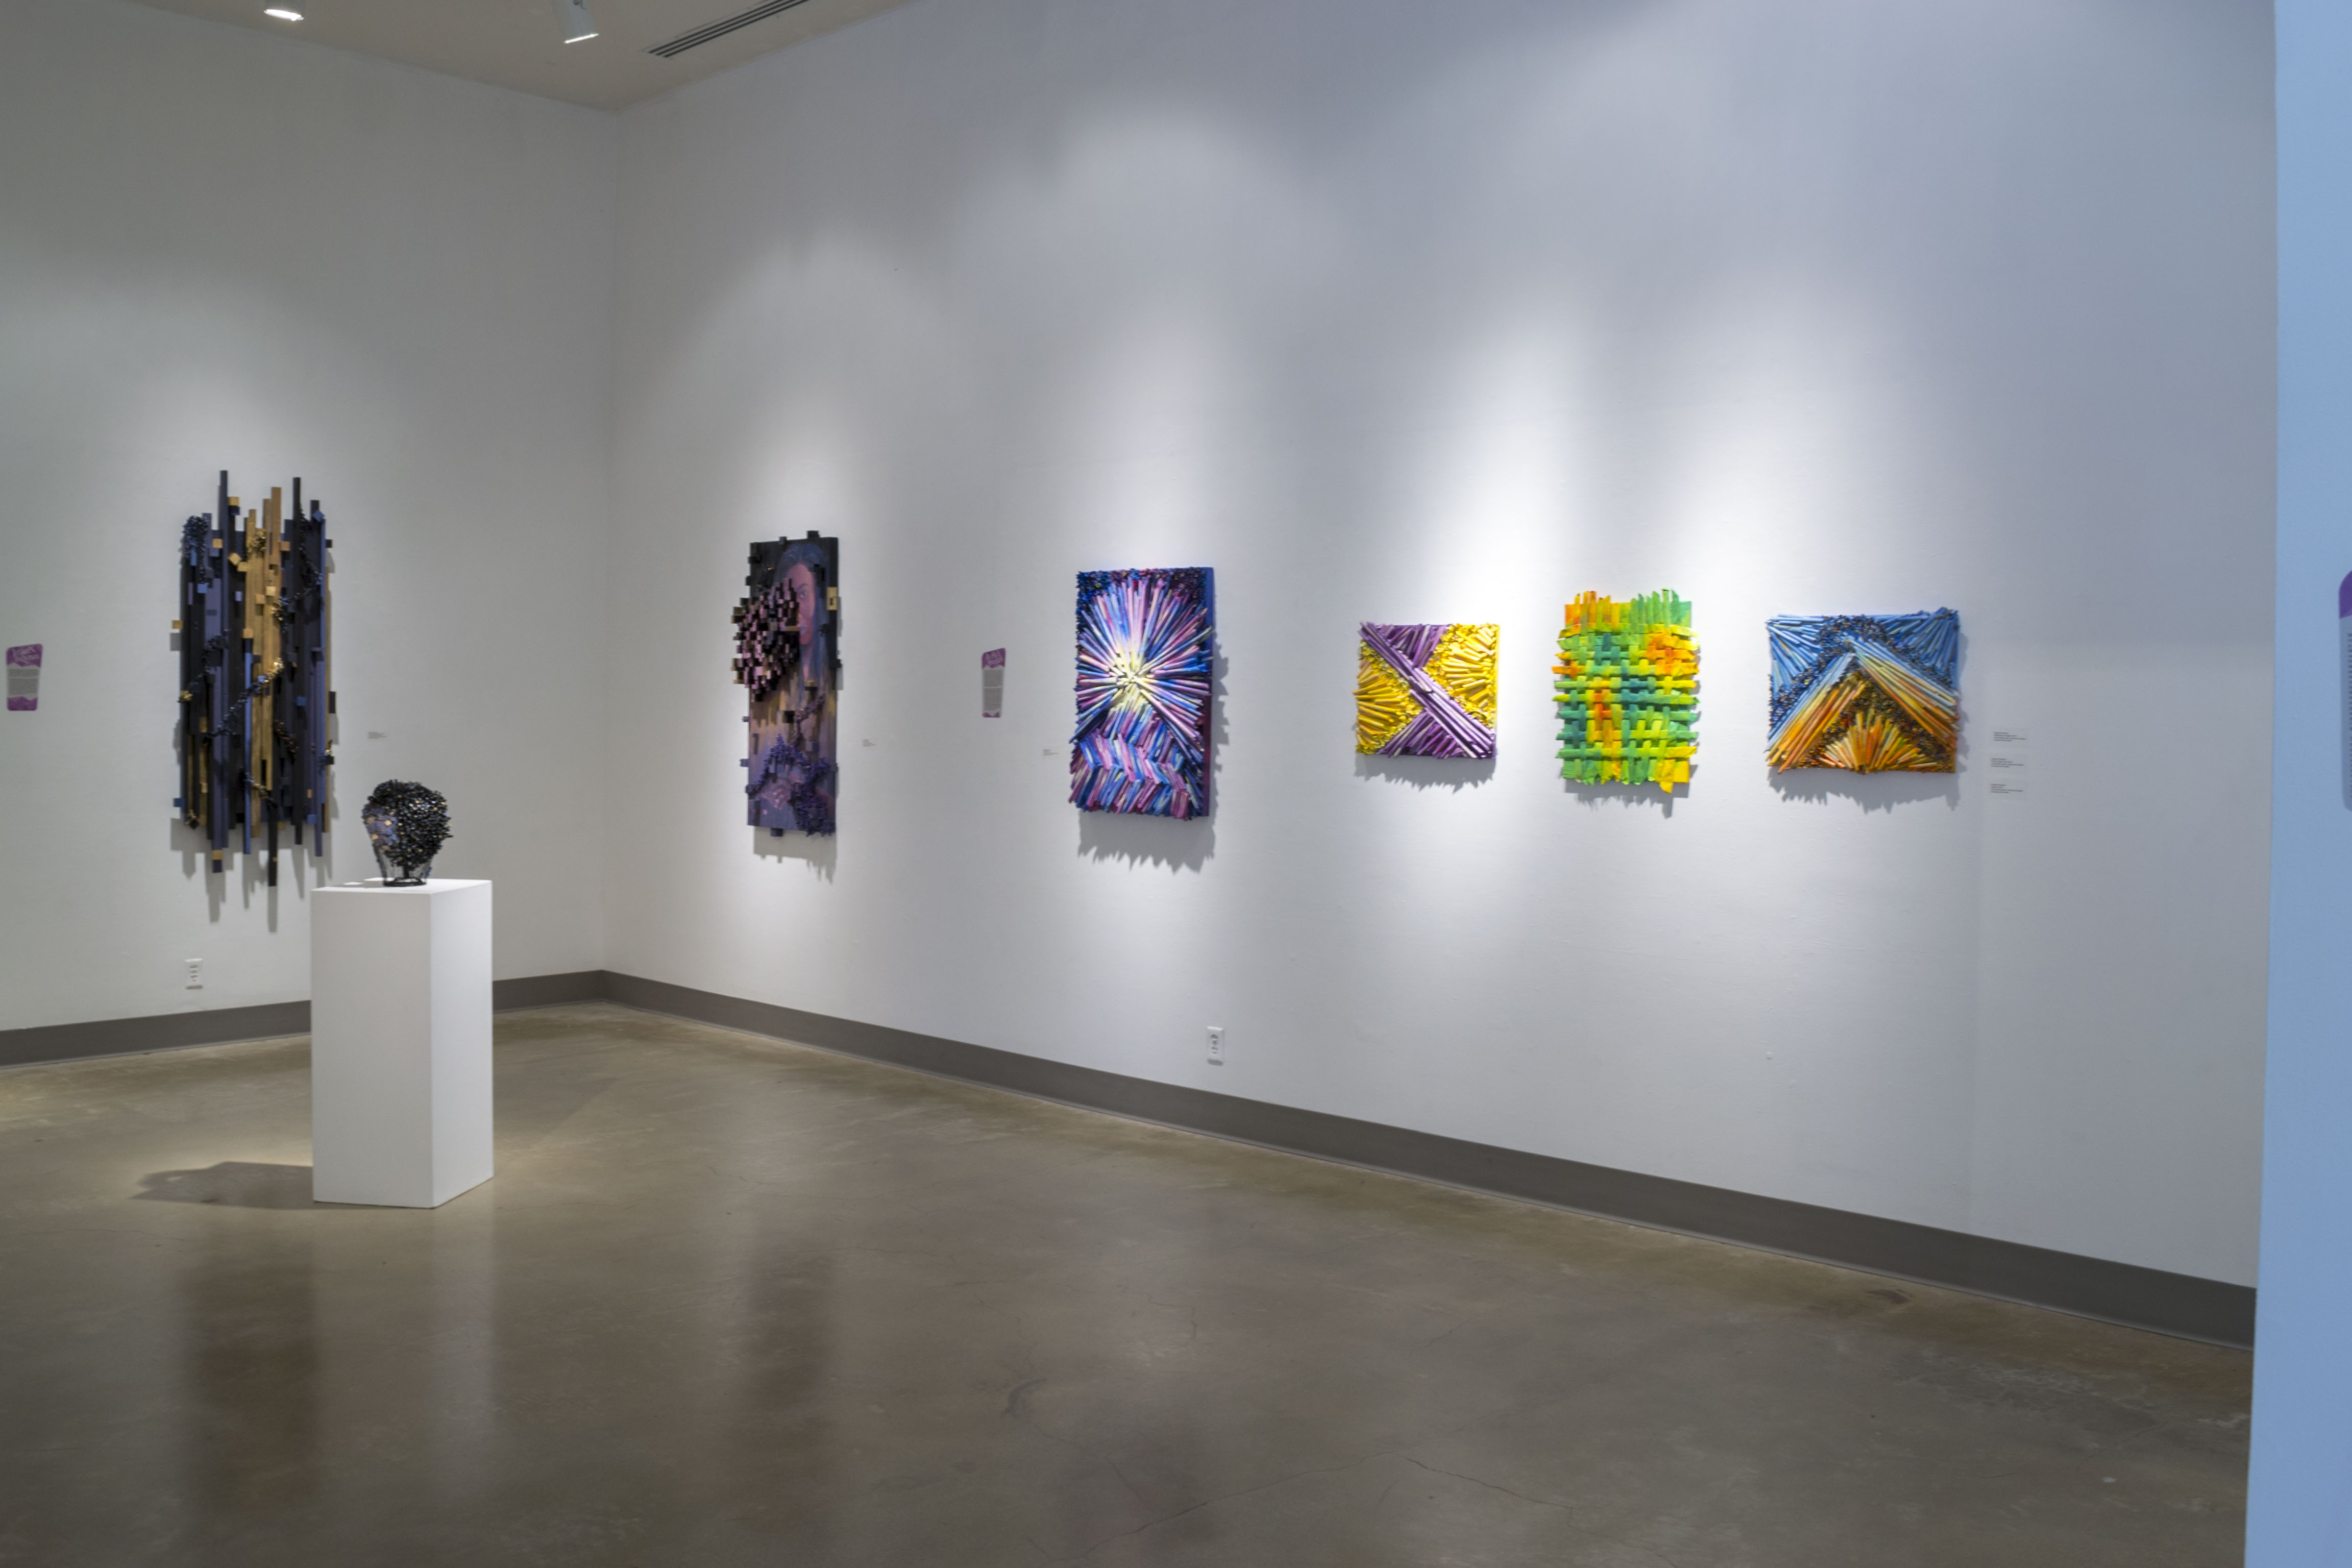 Installation View, Front West Gallery, Polykroma 2015 Exhibition, May. 18, 2015 to June. 14, 2015.